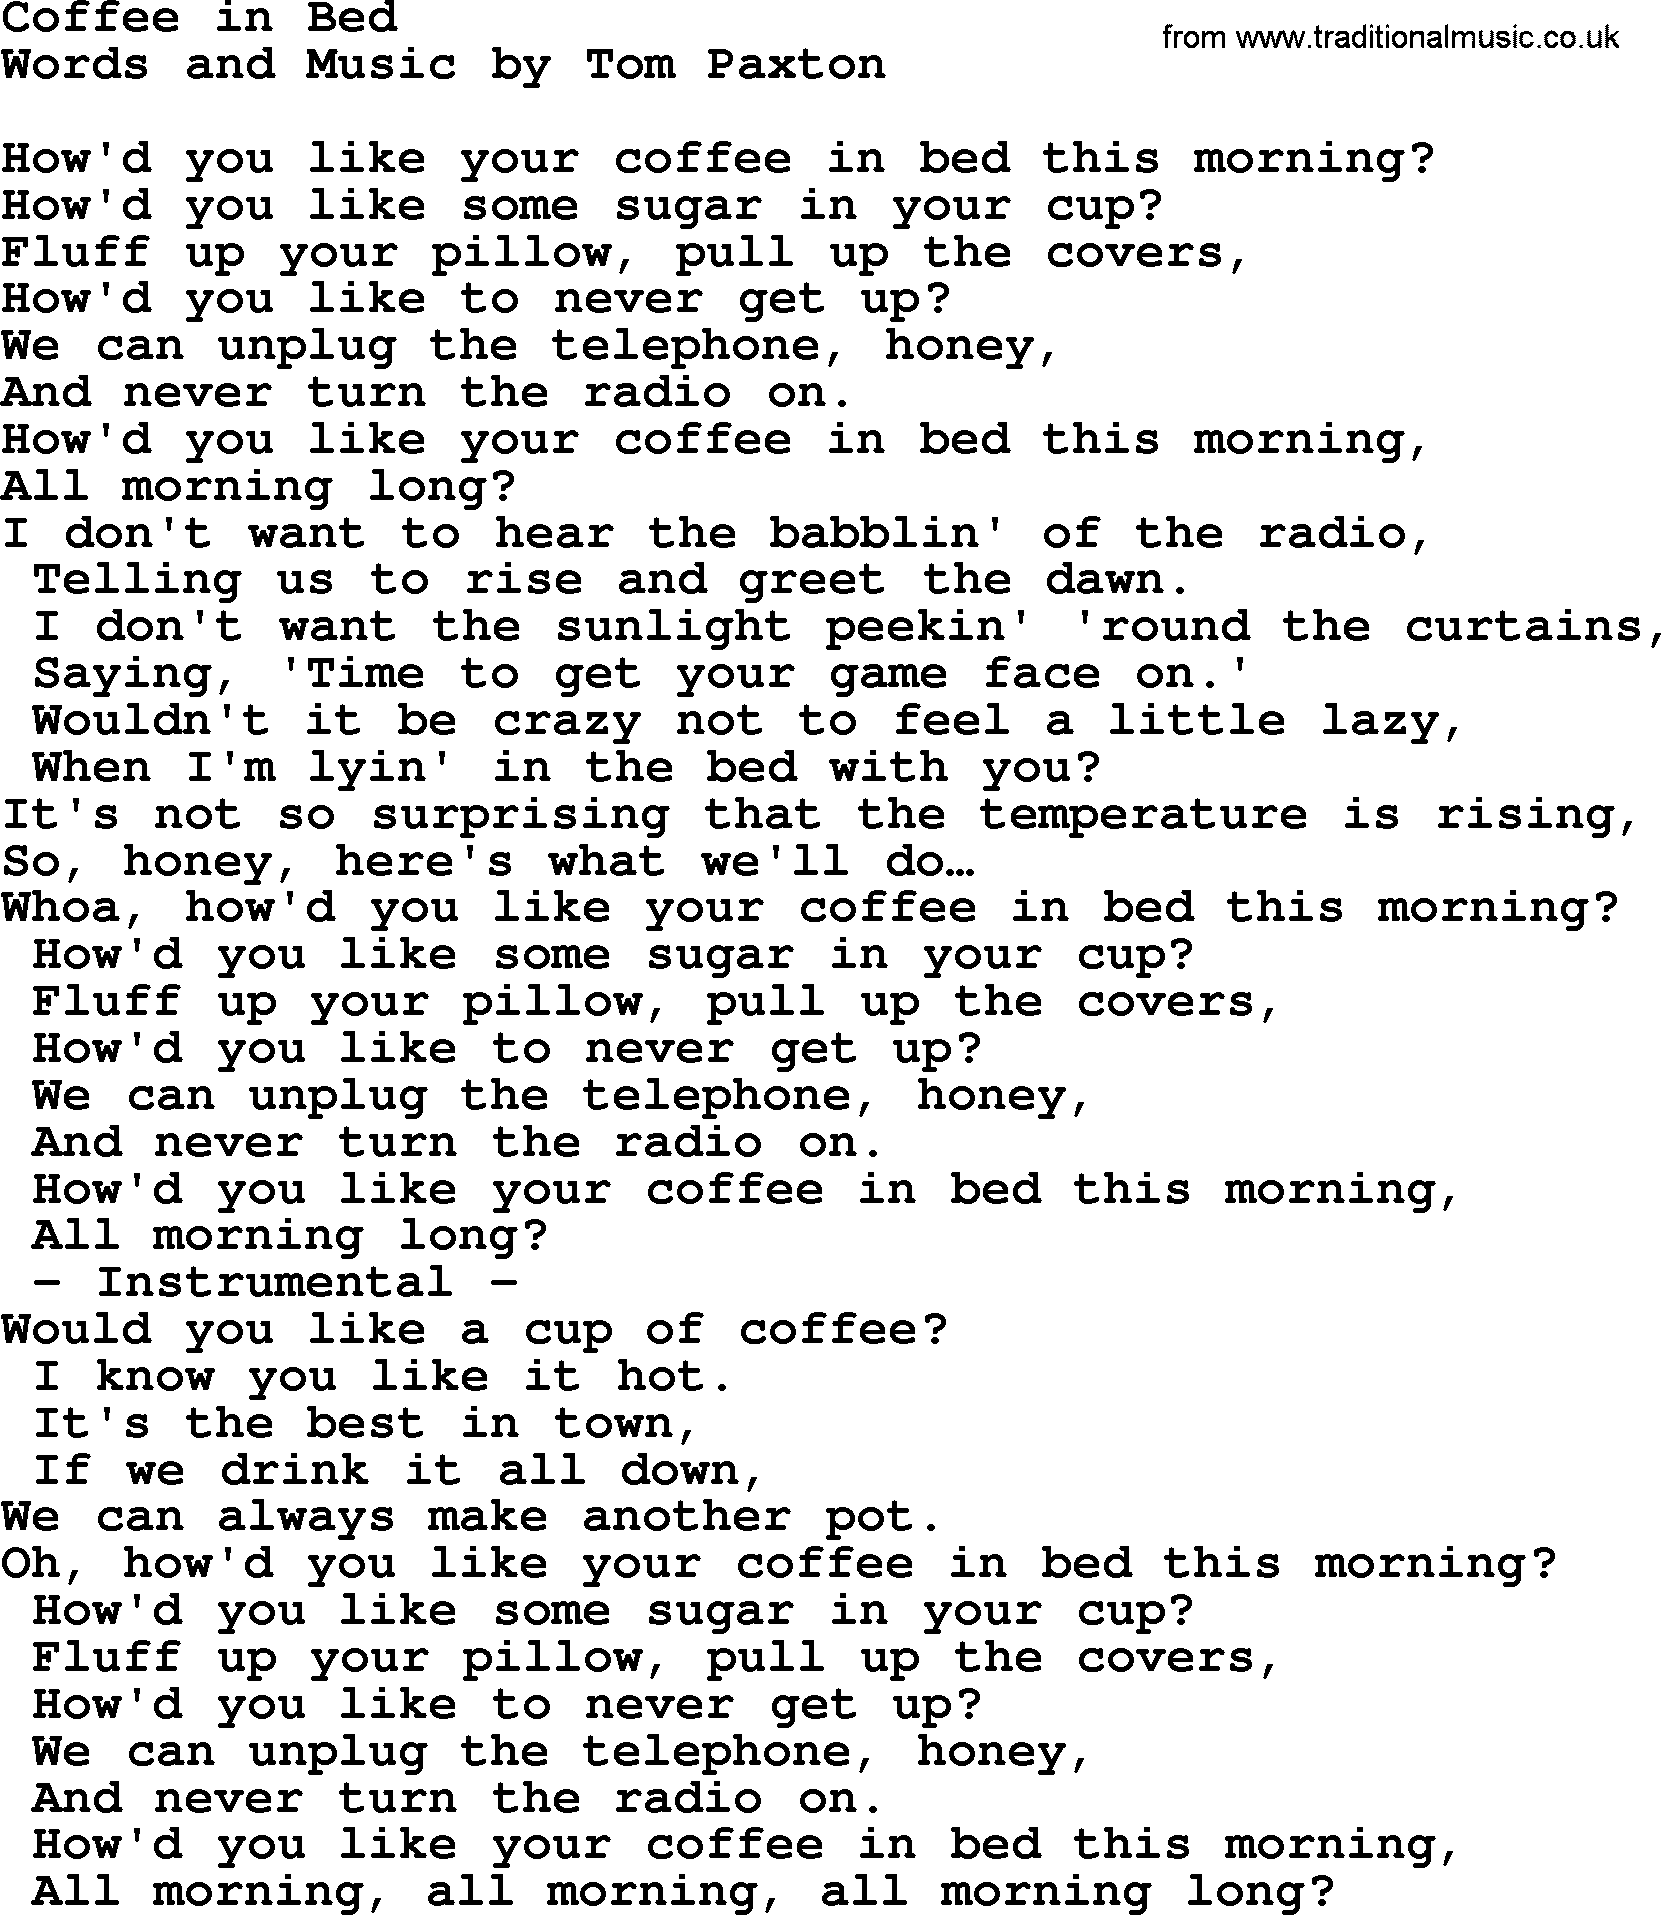 Tom Paxton song: Coffee In Bed, lyrics